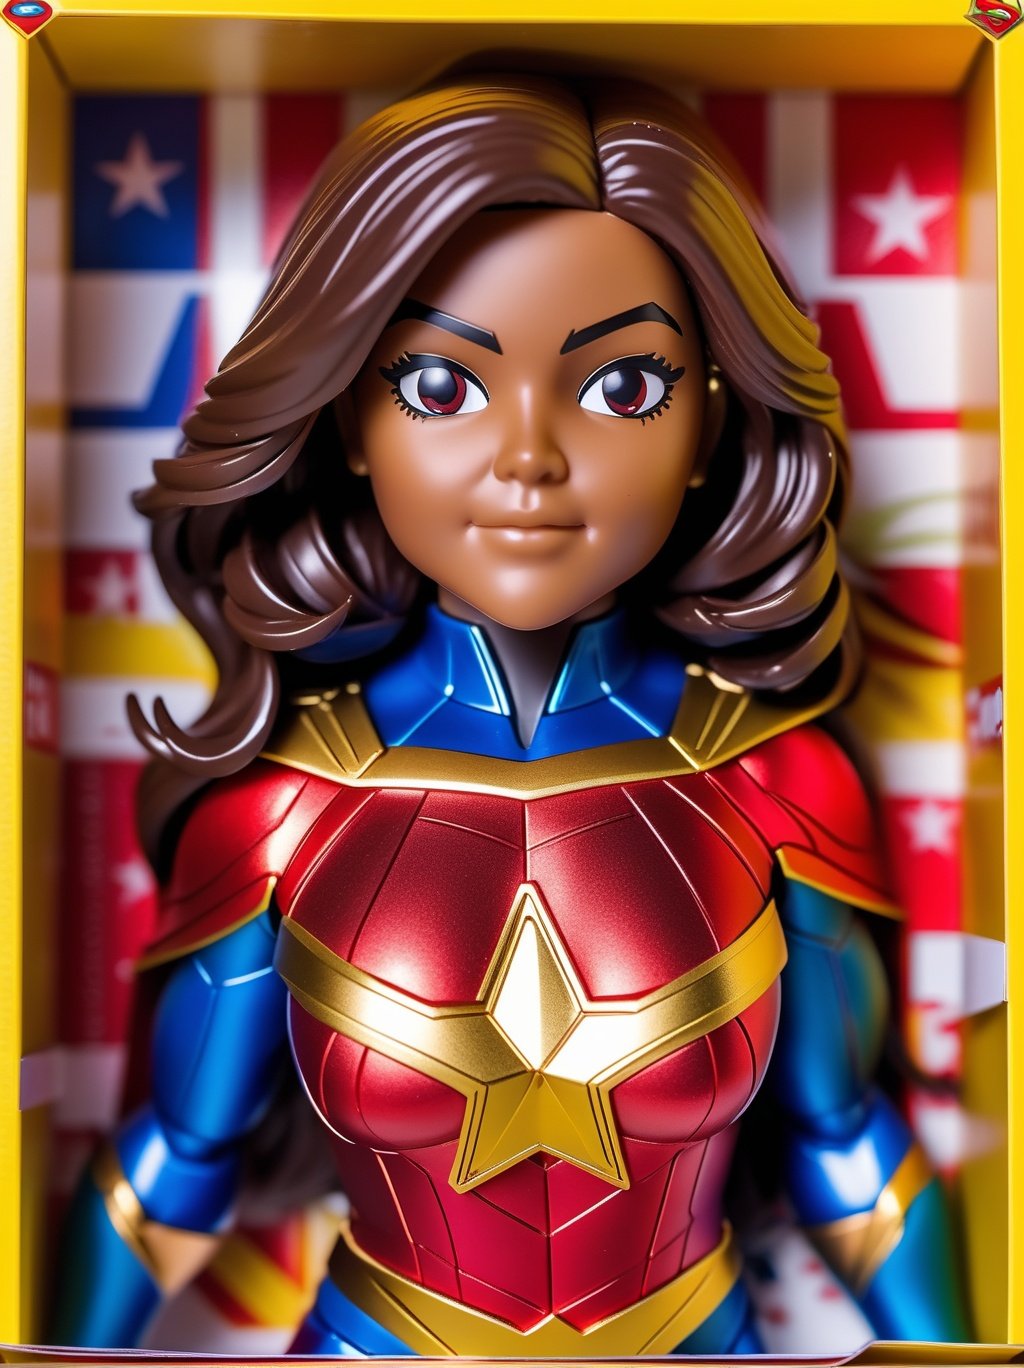 (8k, ultra quality, masterpiece:1.5), (Dutch angle:1.3), ActionFigureQuiron style,action figure box, solo, kamala khan,  focus,  bodysuit, superhero,box,action figure, toy, doll, character print, (best quality:1.15), (detailed:1.15), (realistic:1.2), (intricate:1.4),  cover page, card, in a gift box, no humans,  gift box, playset, in a box, full body, toy playset pack, in a gift box, premium playset toy box,<lyco:SDXL1.0_quiron_ActionFigure_v4.1_lycoris:1.0>